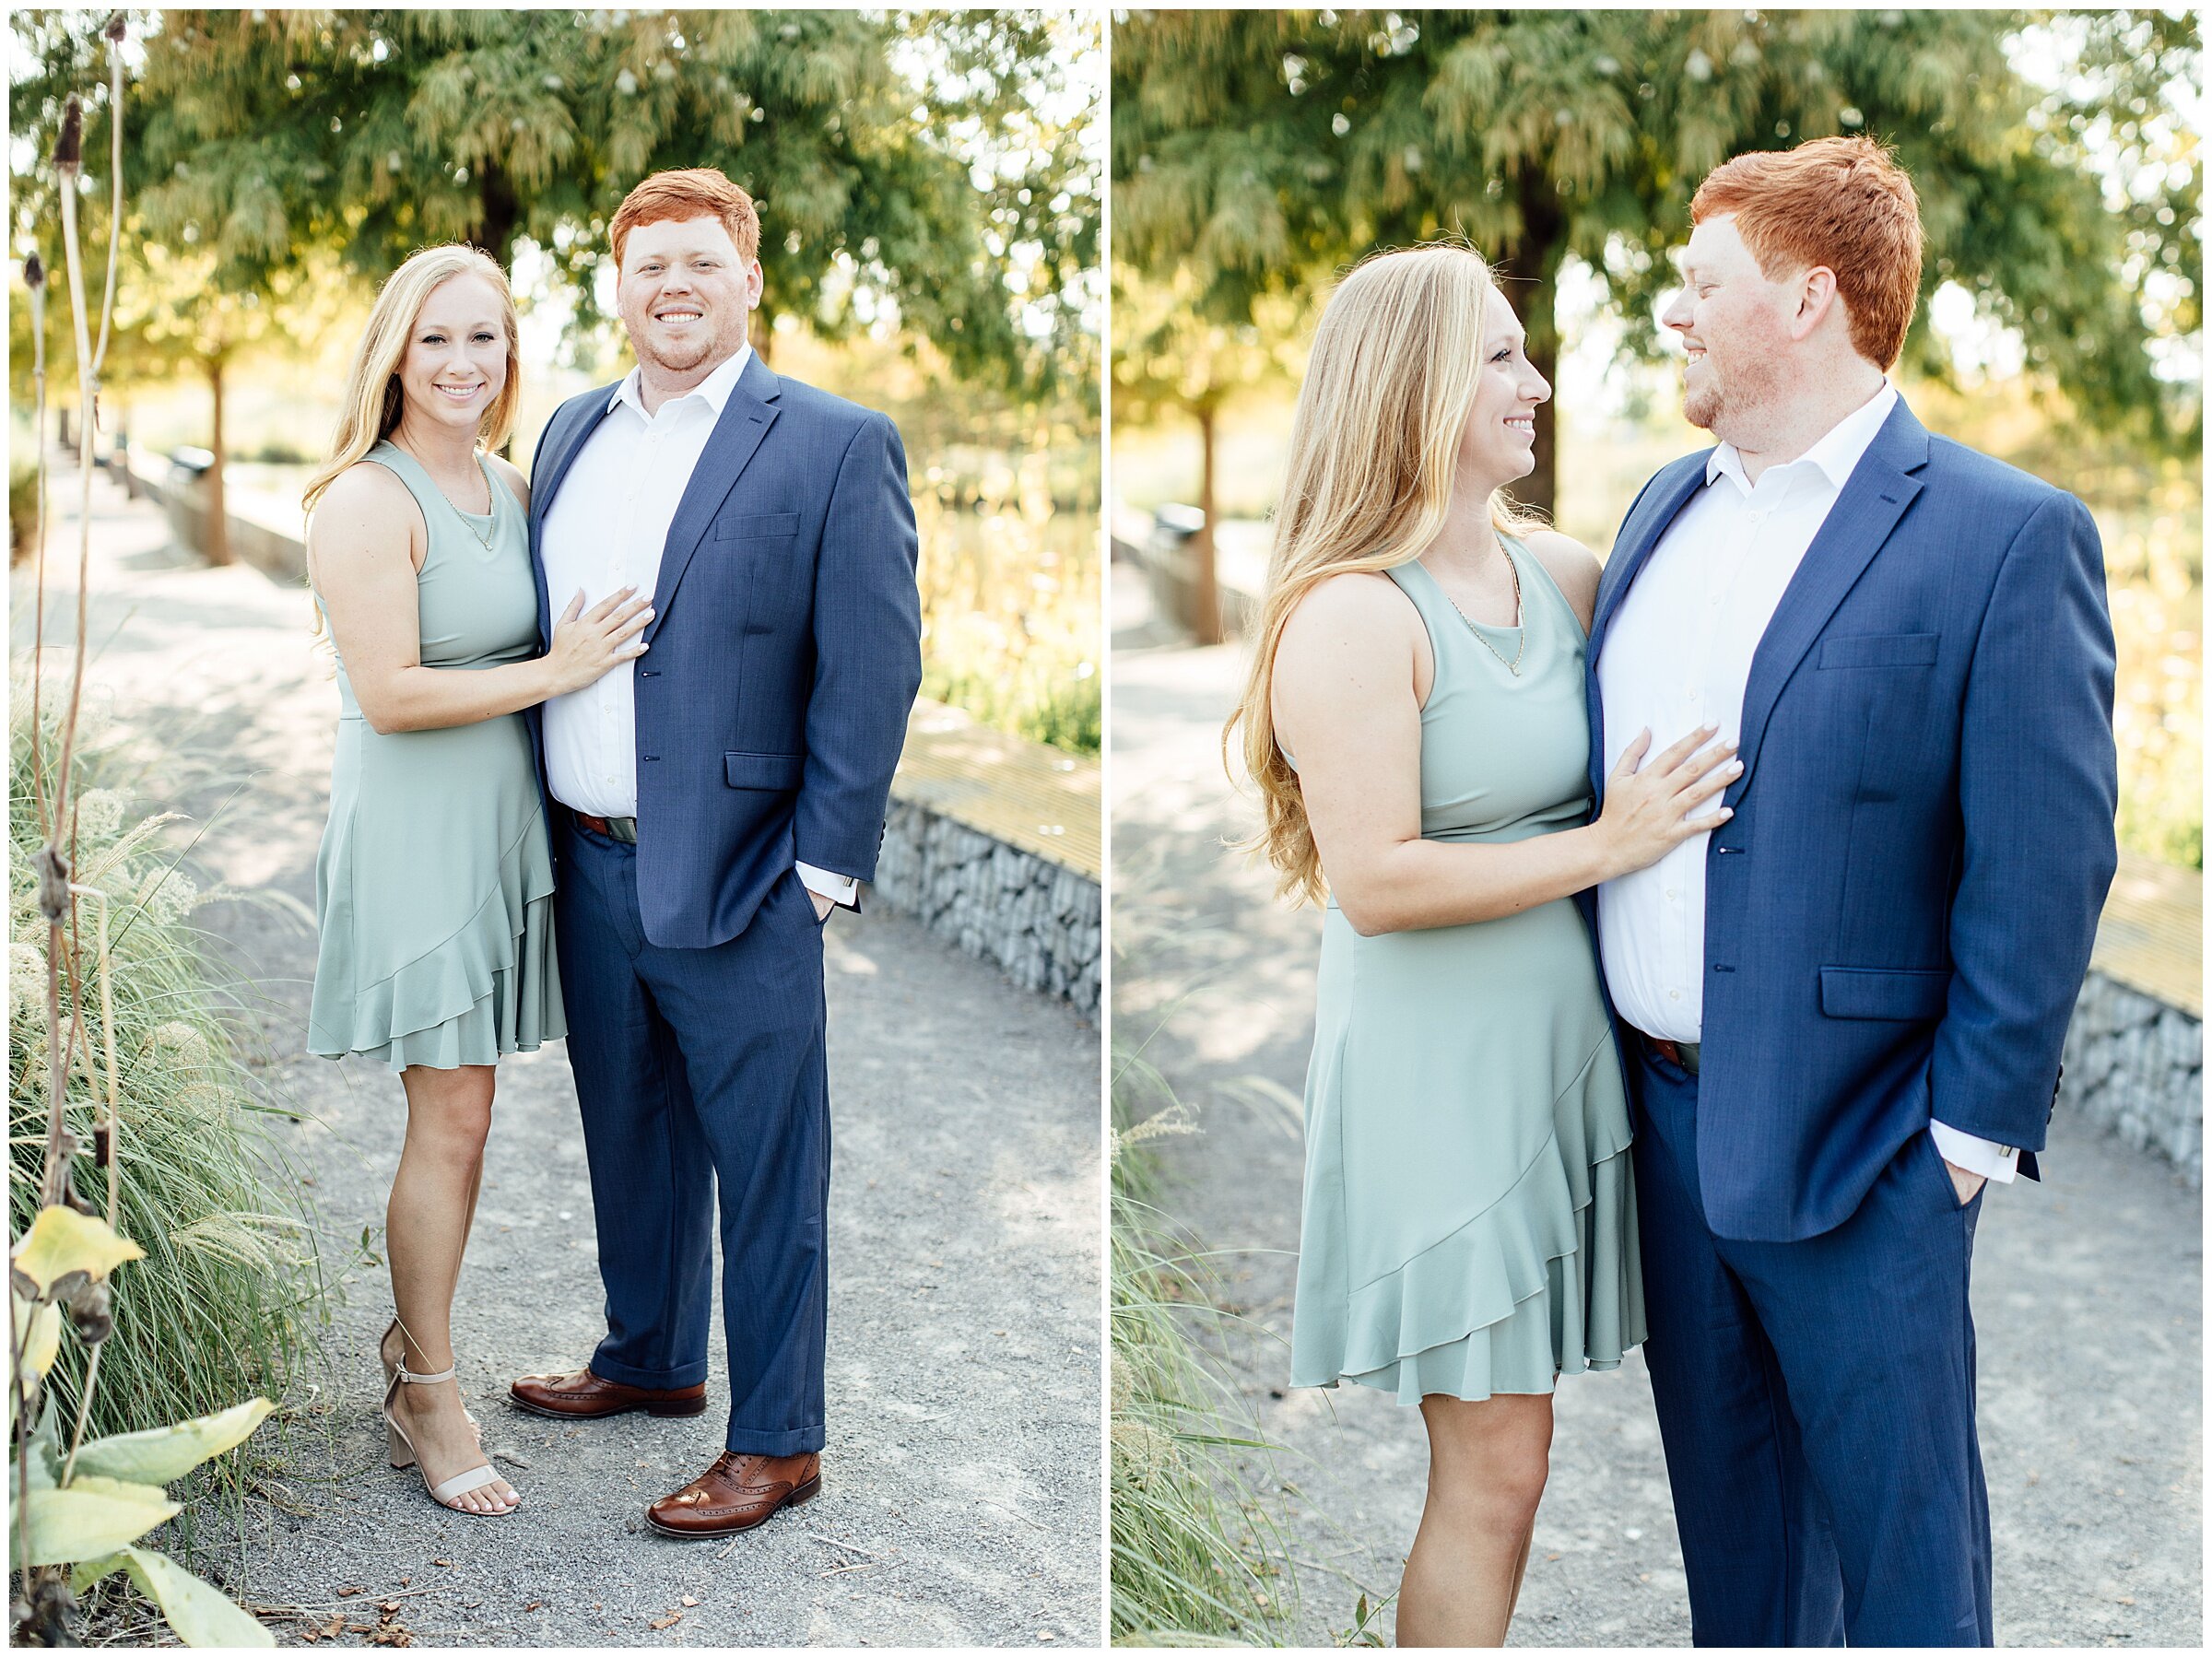  railroad park engagement session, rooftop engagement pictures, lindsey ann photography, downtown Birmingham engagement pictures, Birmingham al wedding photographer 